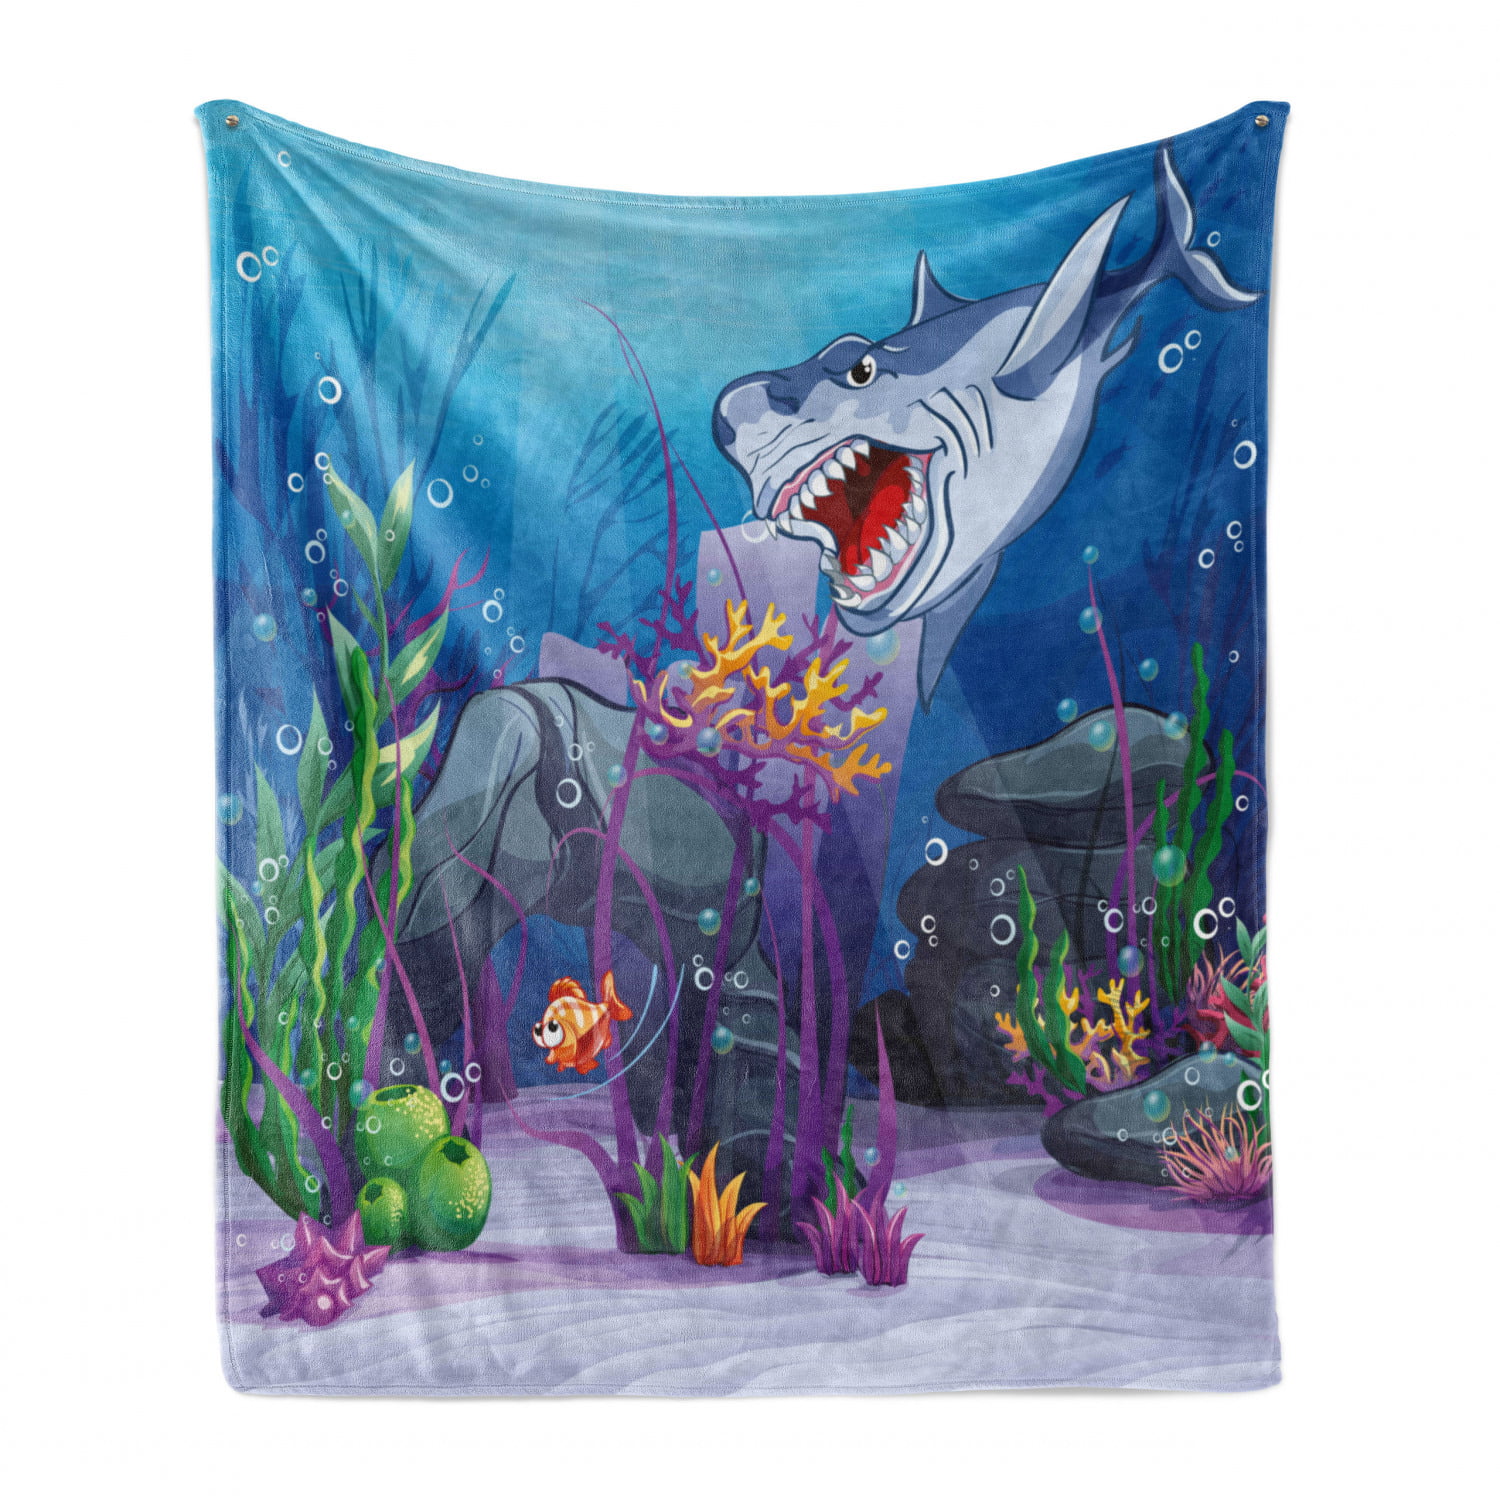 Ocean Theme Nautical Sea Corals and Sponges in Colorful Drawing 60 x 80 Cozy Plush for Indoor and Outdoor Use White Dark Mauve and Salmon Ambesonne Marine Soft Flannel Fleece Throw Blanket 